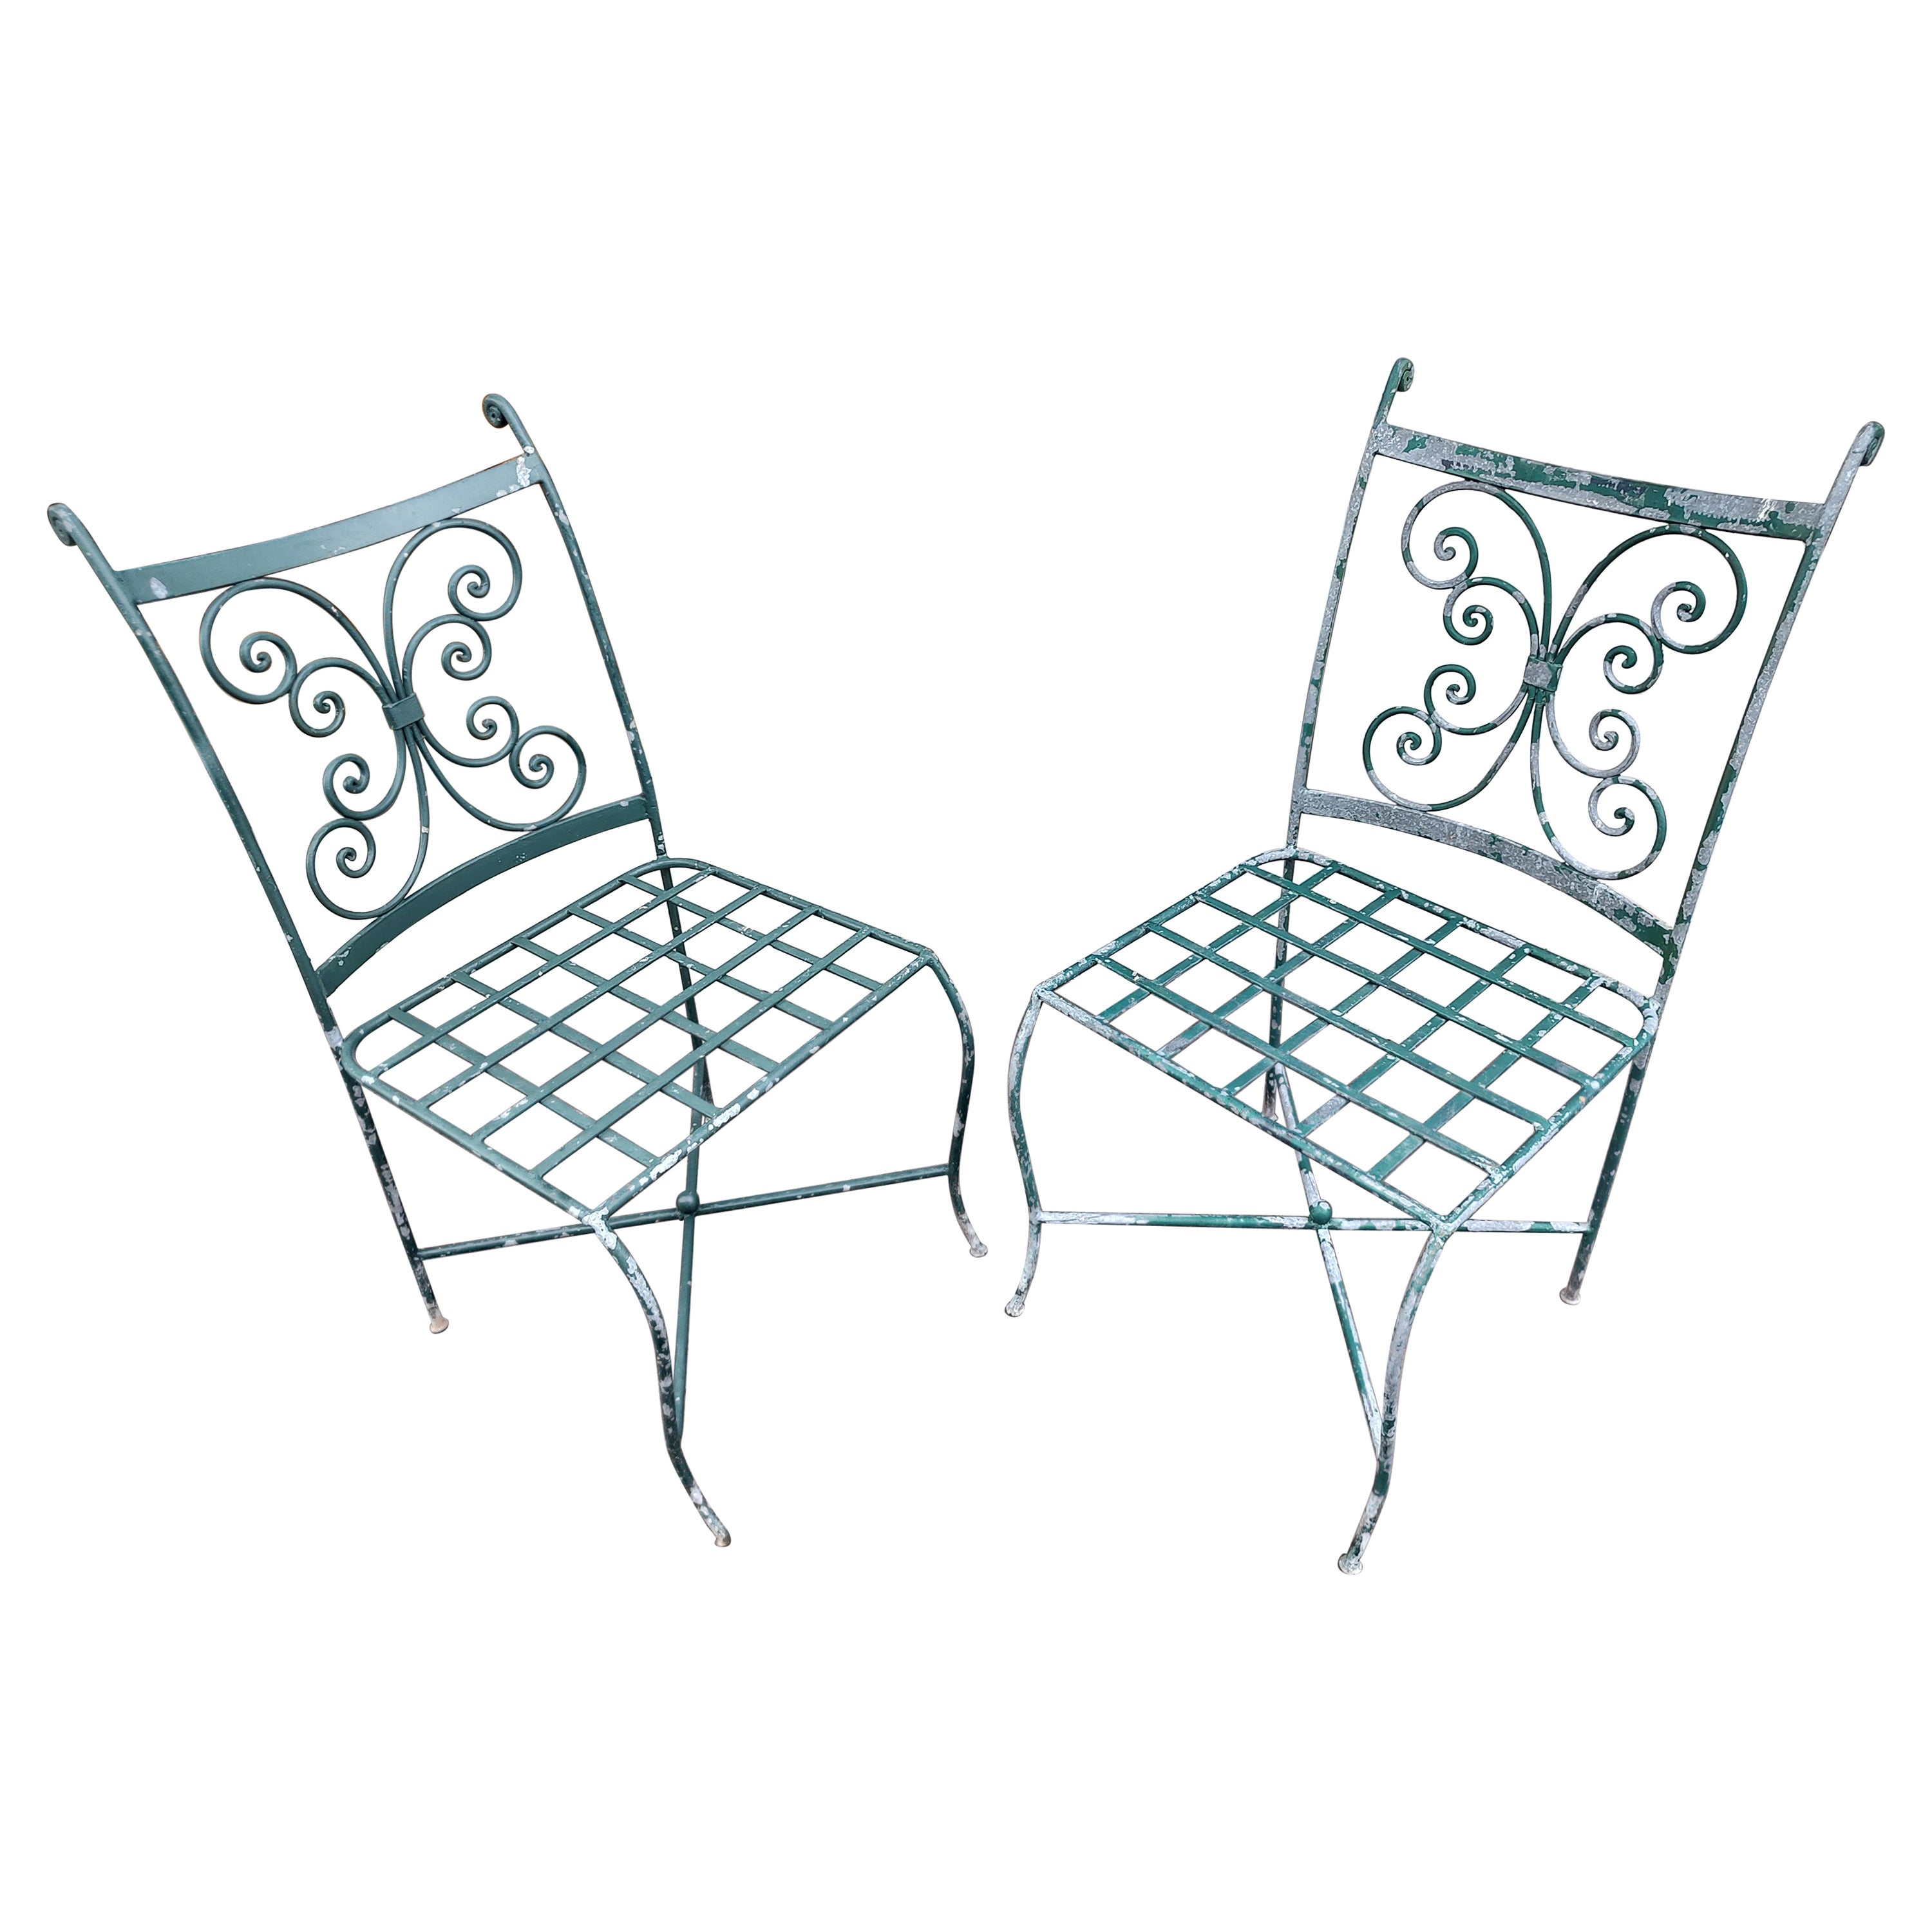 Pair of French Iron Scroll Back Zinc Coated Outdoor Garden Cafe Chairs